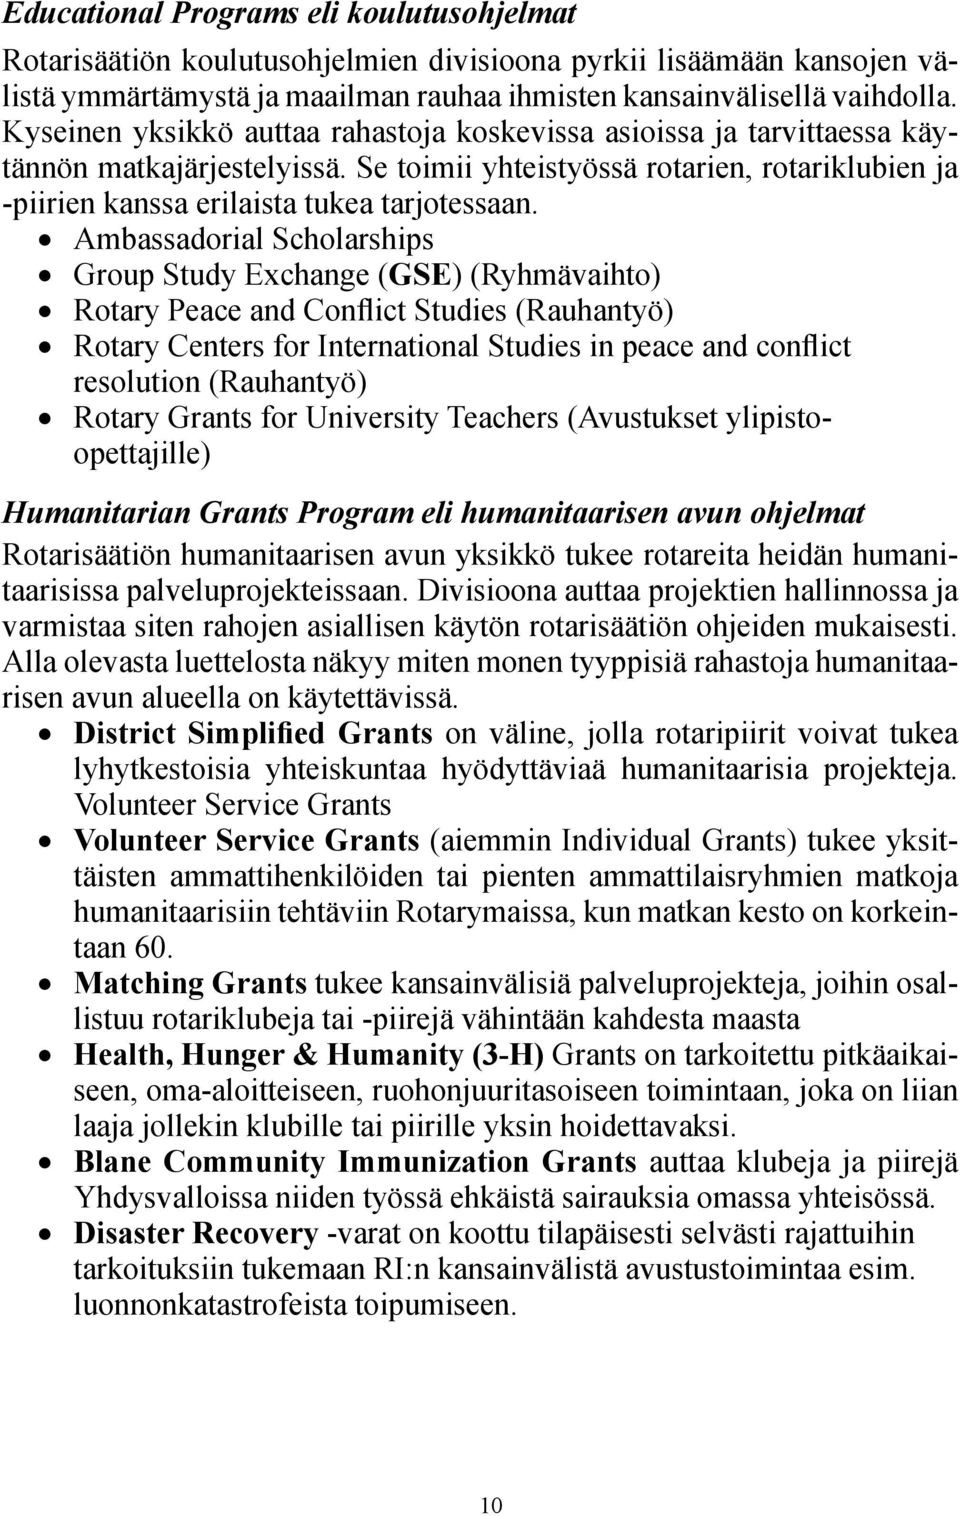 Ambassadorial Scholarships Group Study Exchange (GSE) (Ryhmävaihto) Rotary Peace and Conflict Studies (Rauhantyö) Rotary Centers for International Studies in peace and conflict resolution (Rauhantyö)